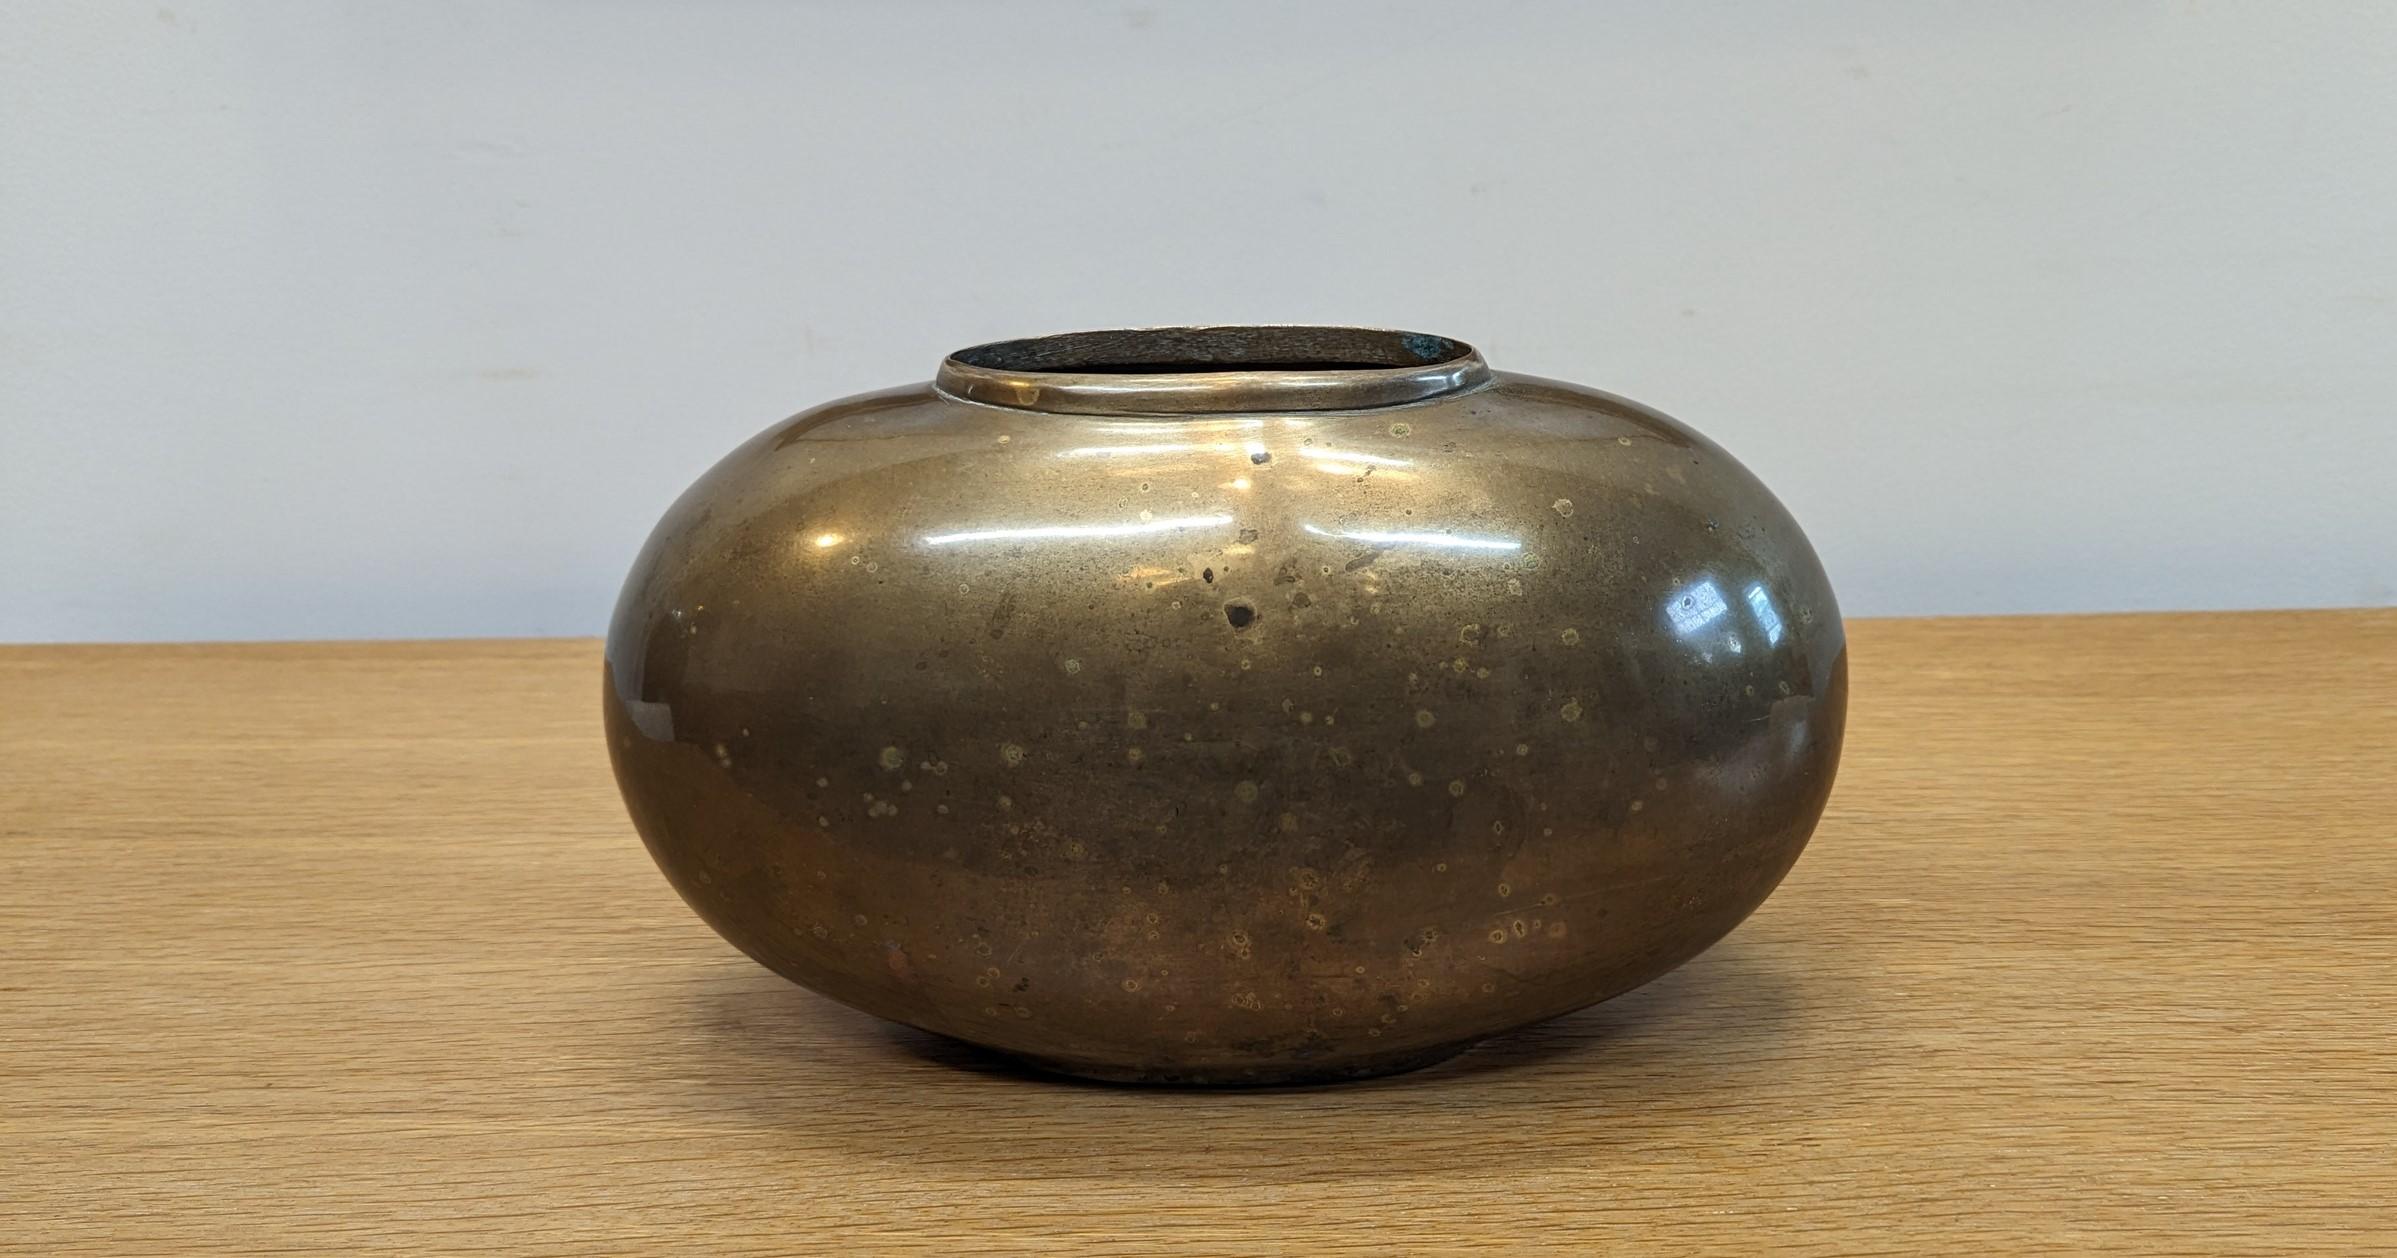 A beautiful Brass Oval Vase.  Subtle sublime design having a sculpted oval. Solid Brass with very nice speckled patina, one side has more speckling then the other.   In very good original condition.  Can be used to hold water with flowers or